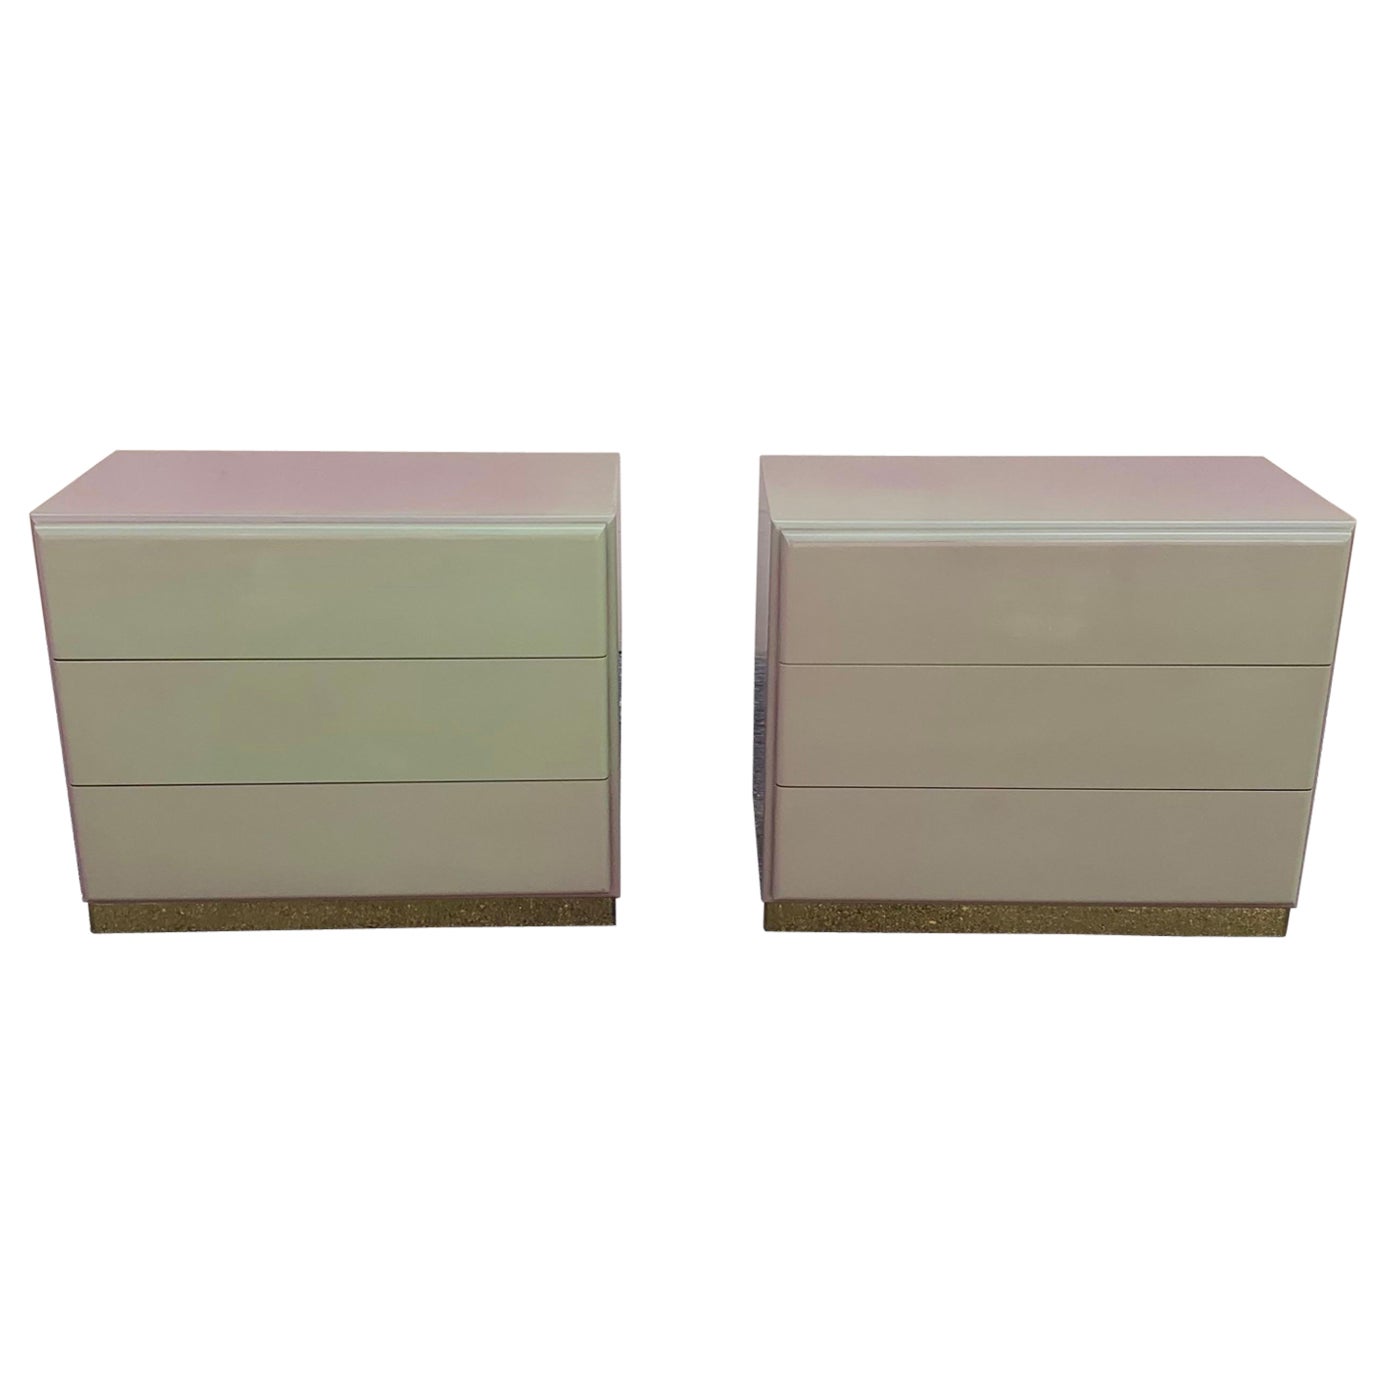 Milo Baughman for Thayer Coggin Night Stands in Jade and Magenta For Sale